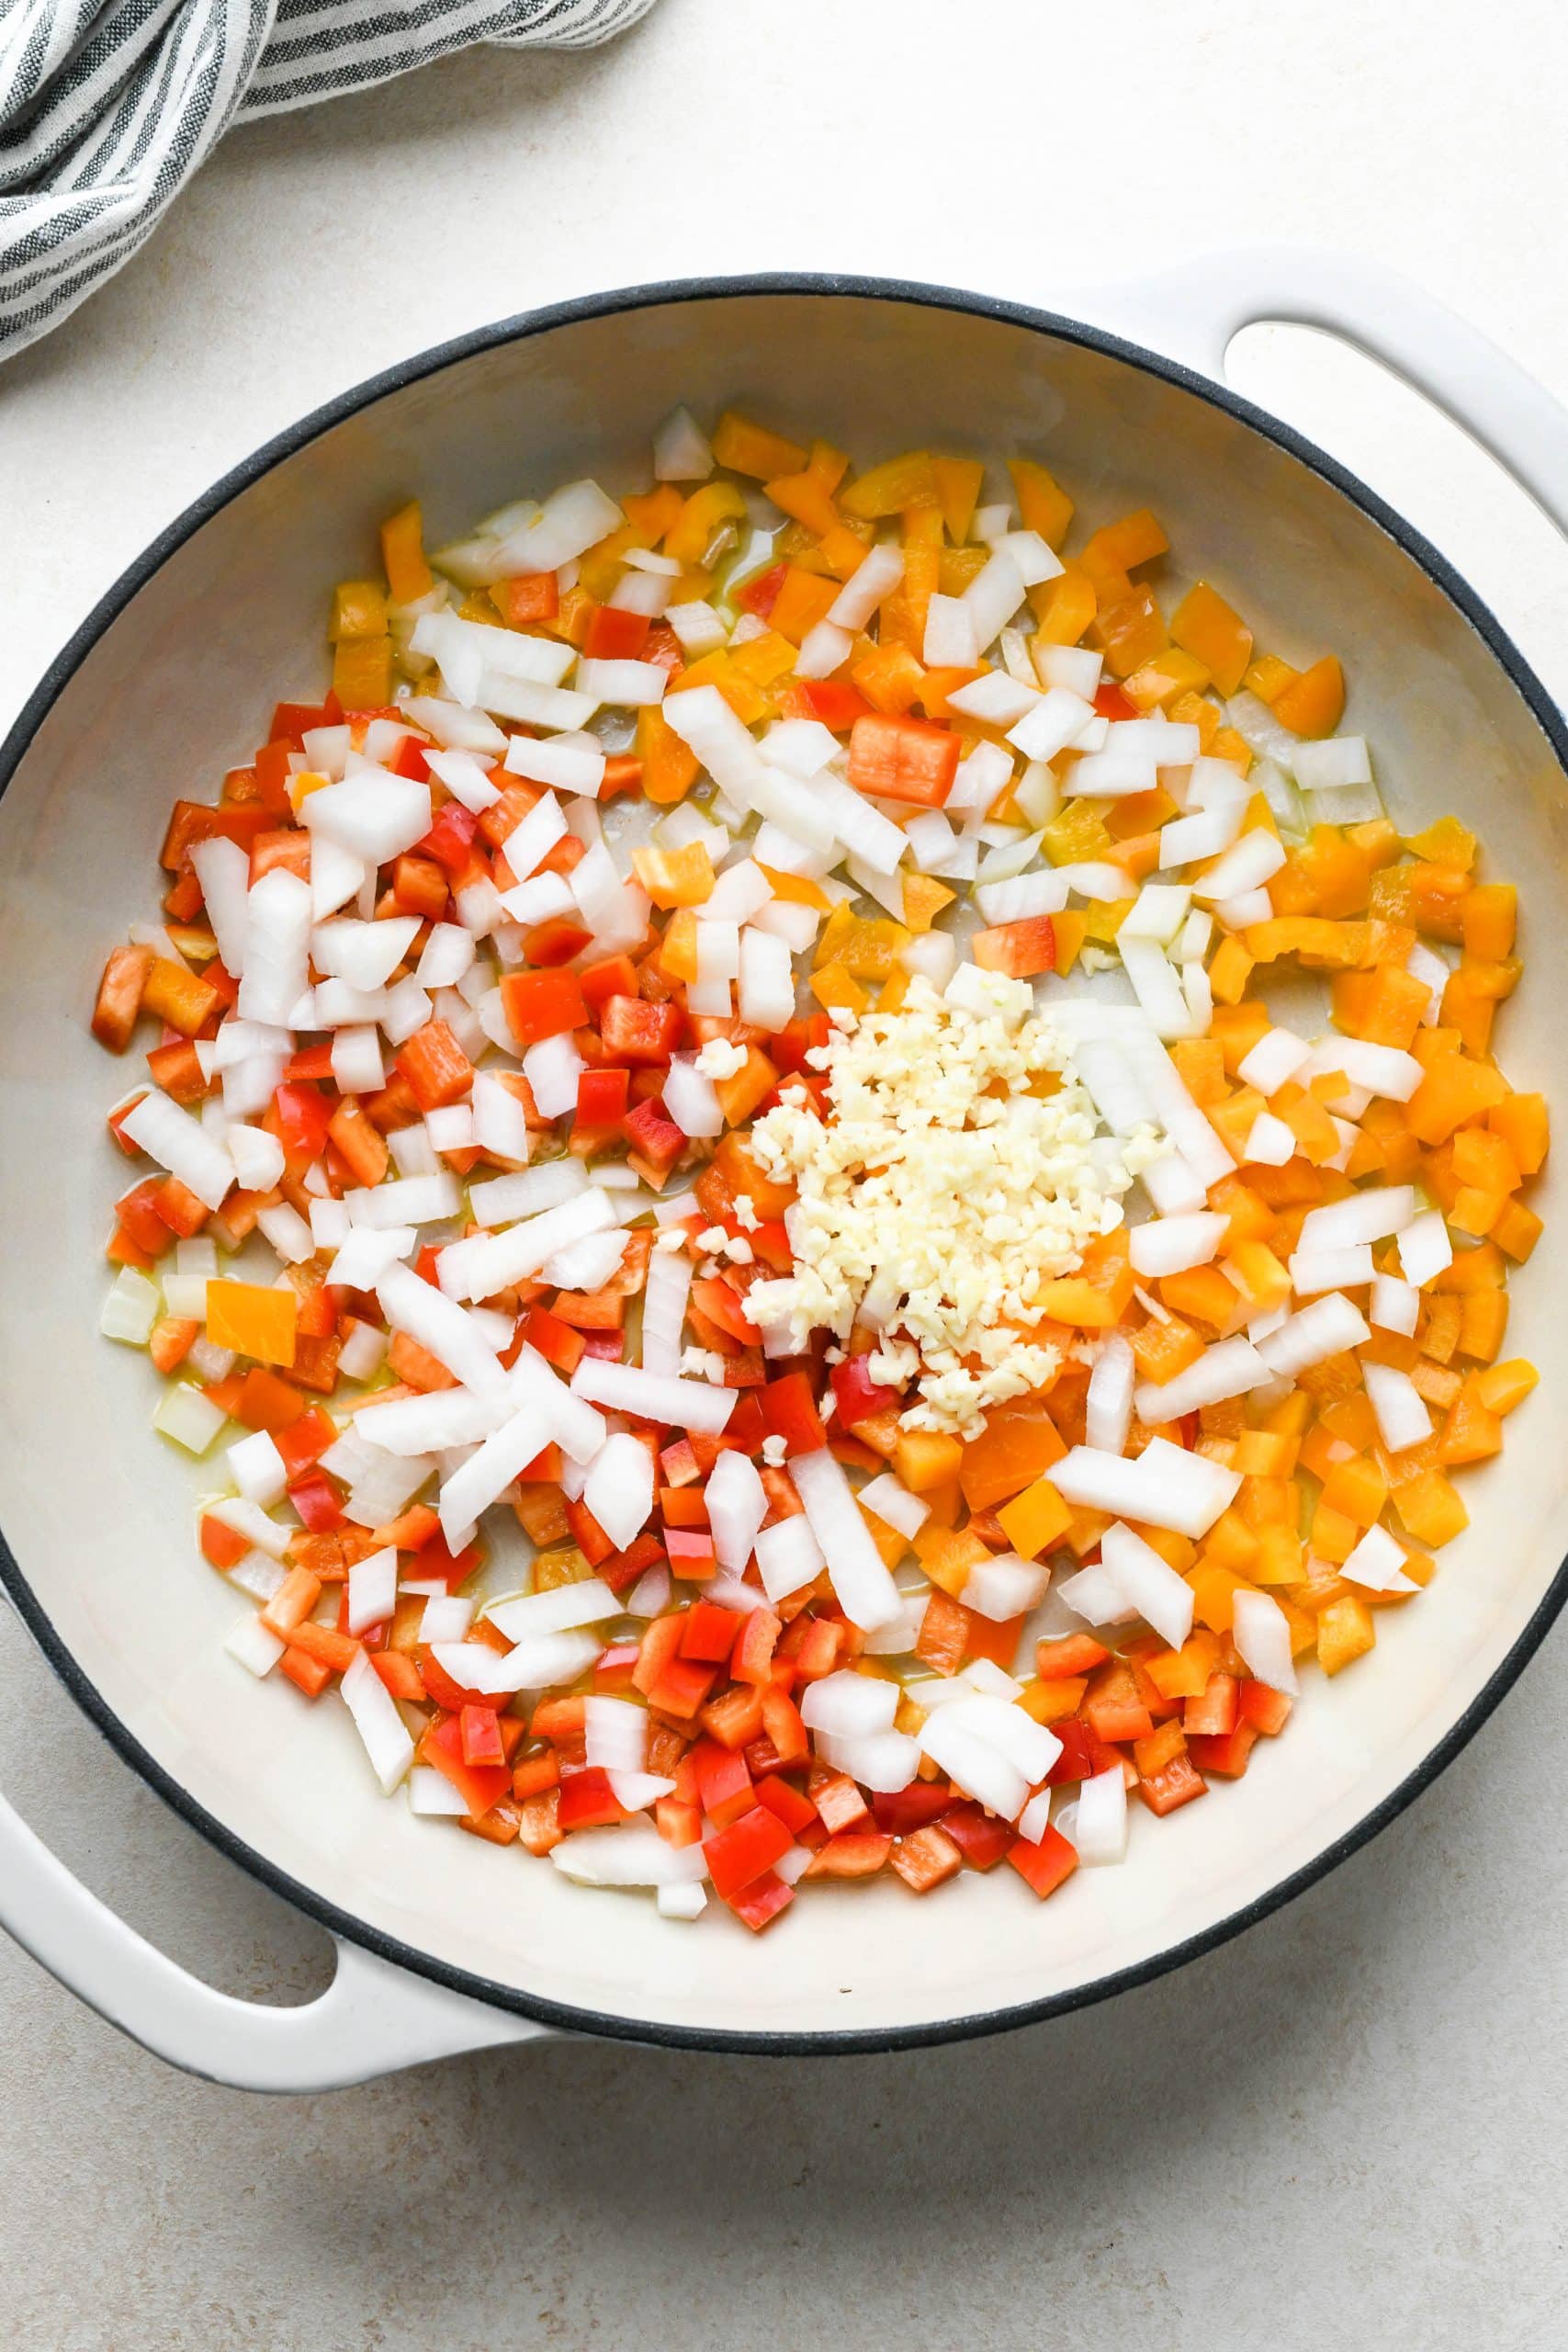 How to make buffalo chicken pasta: Bell peppers, onion, and garlic in a large shallow skillet before cooking.